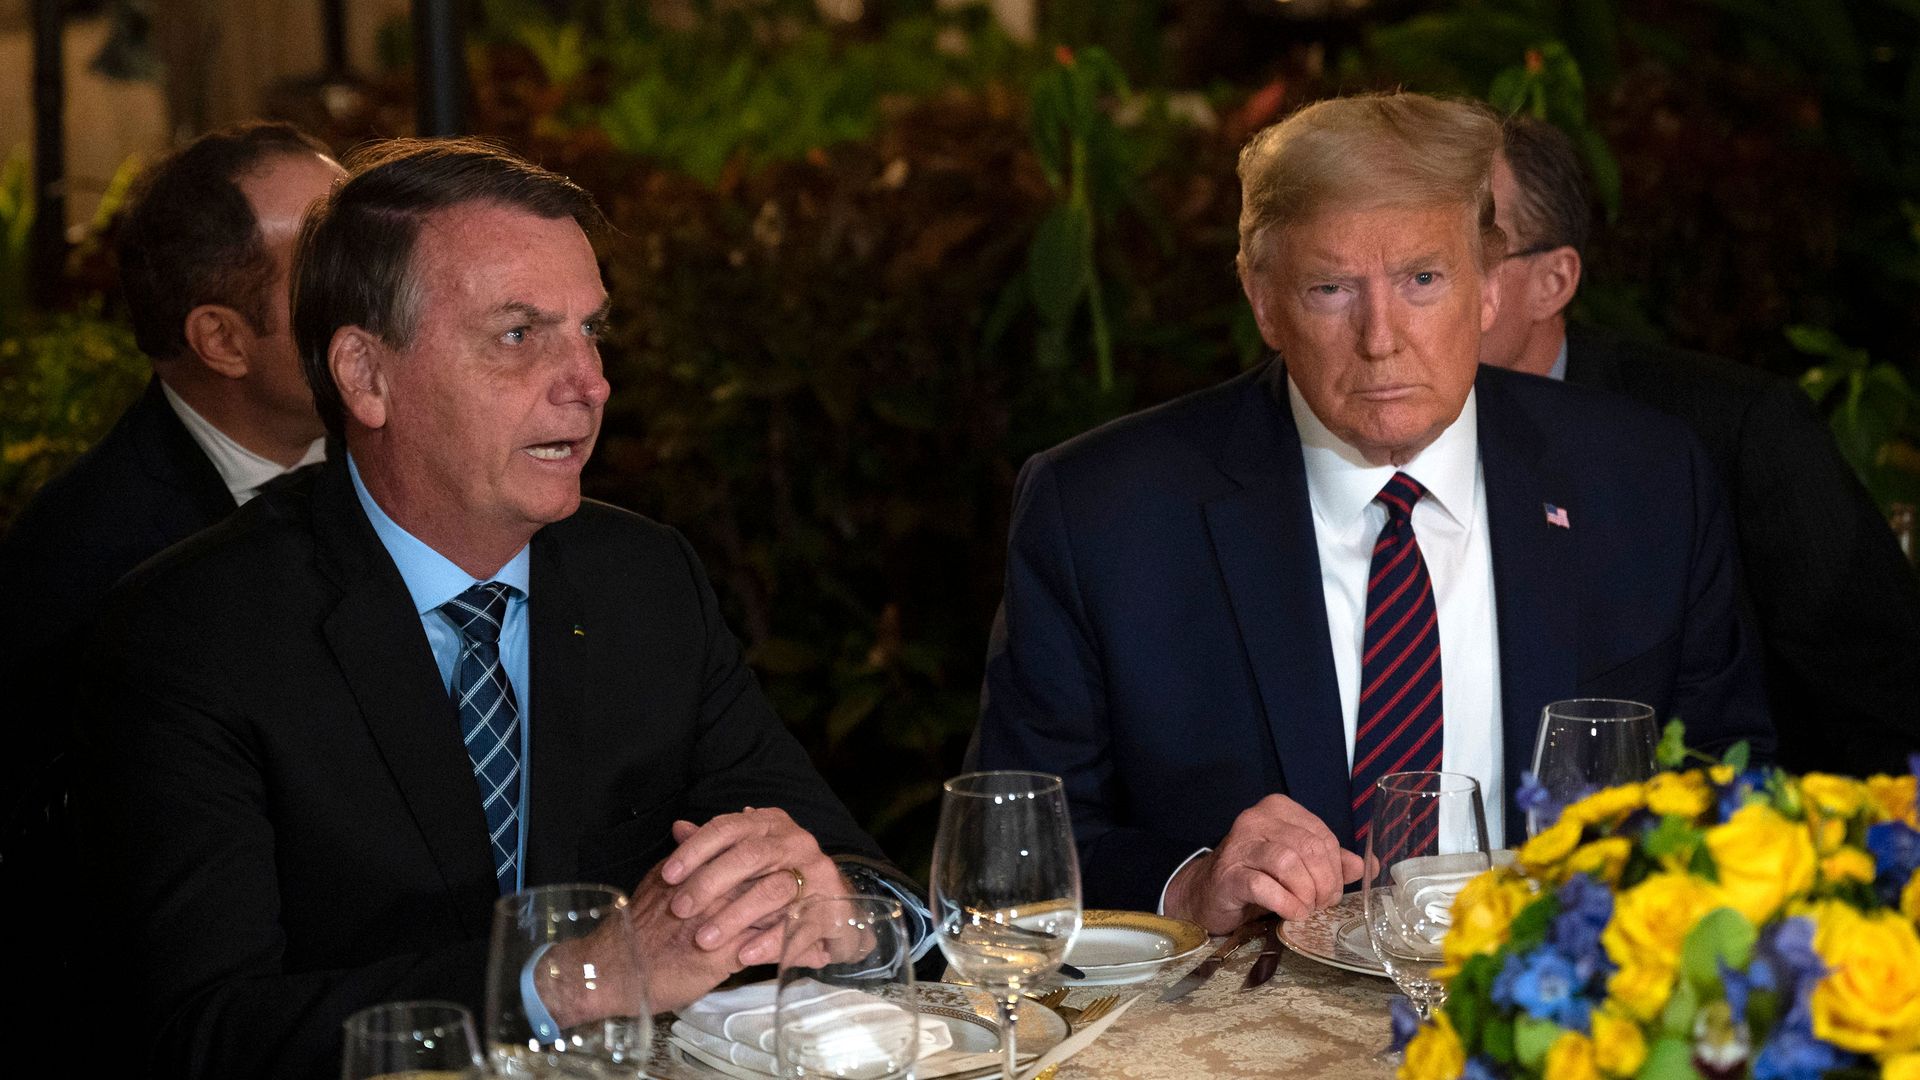 President Bolsonaro and President Trump during a dinner at Mar-a-Lago in March 2020.